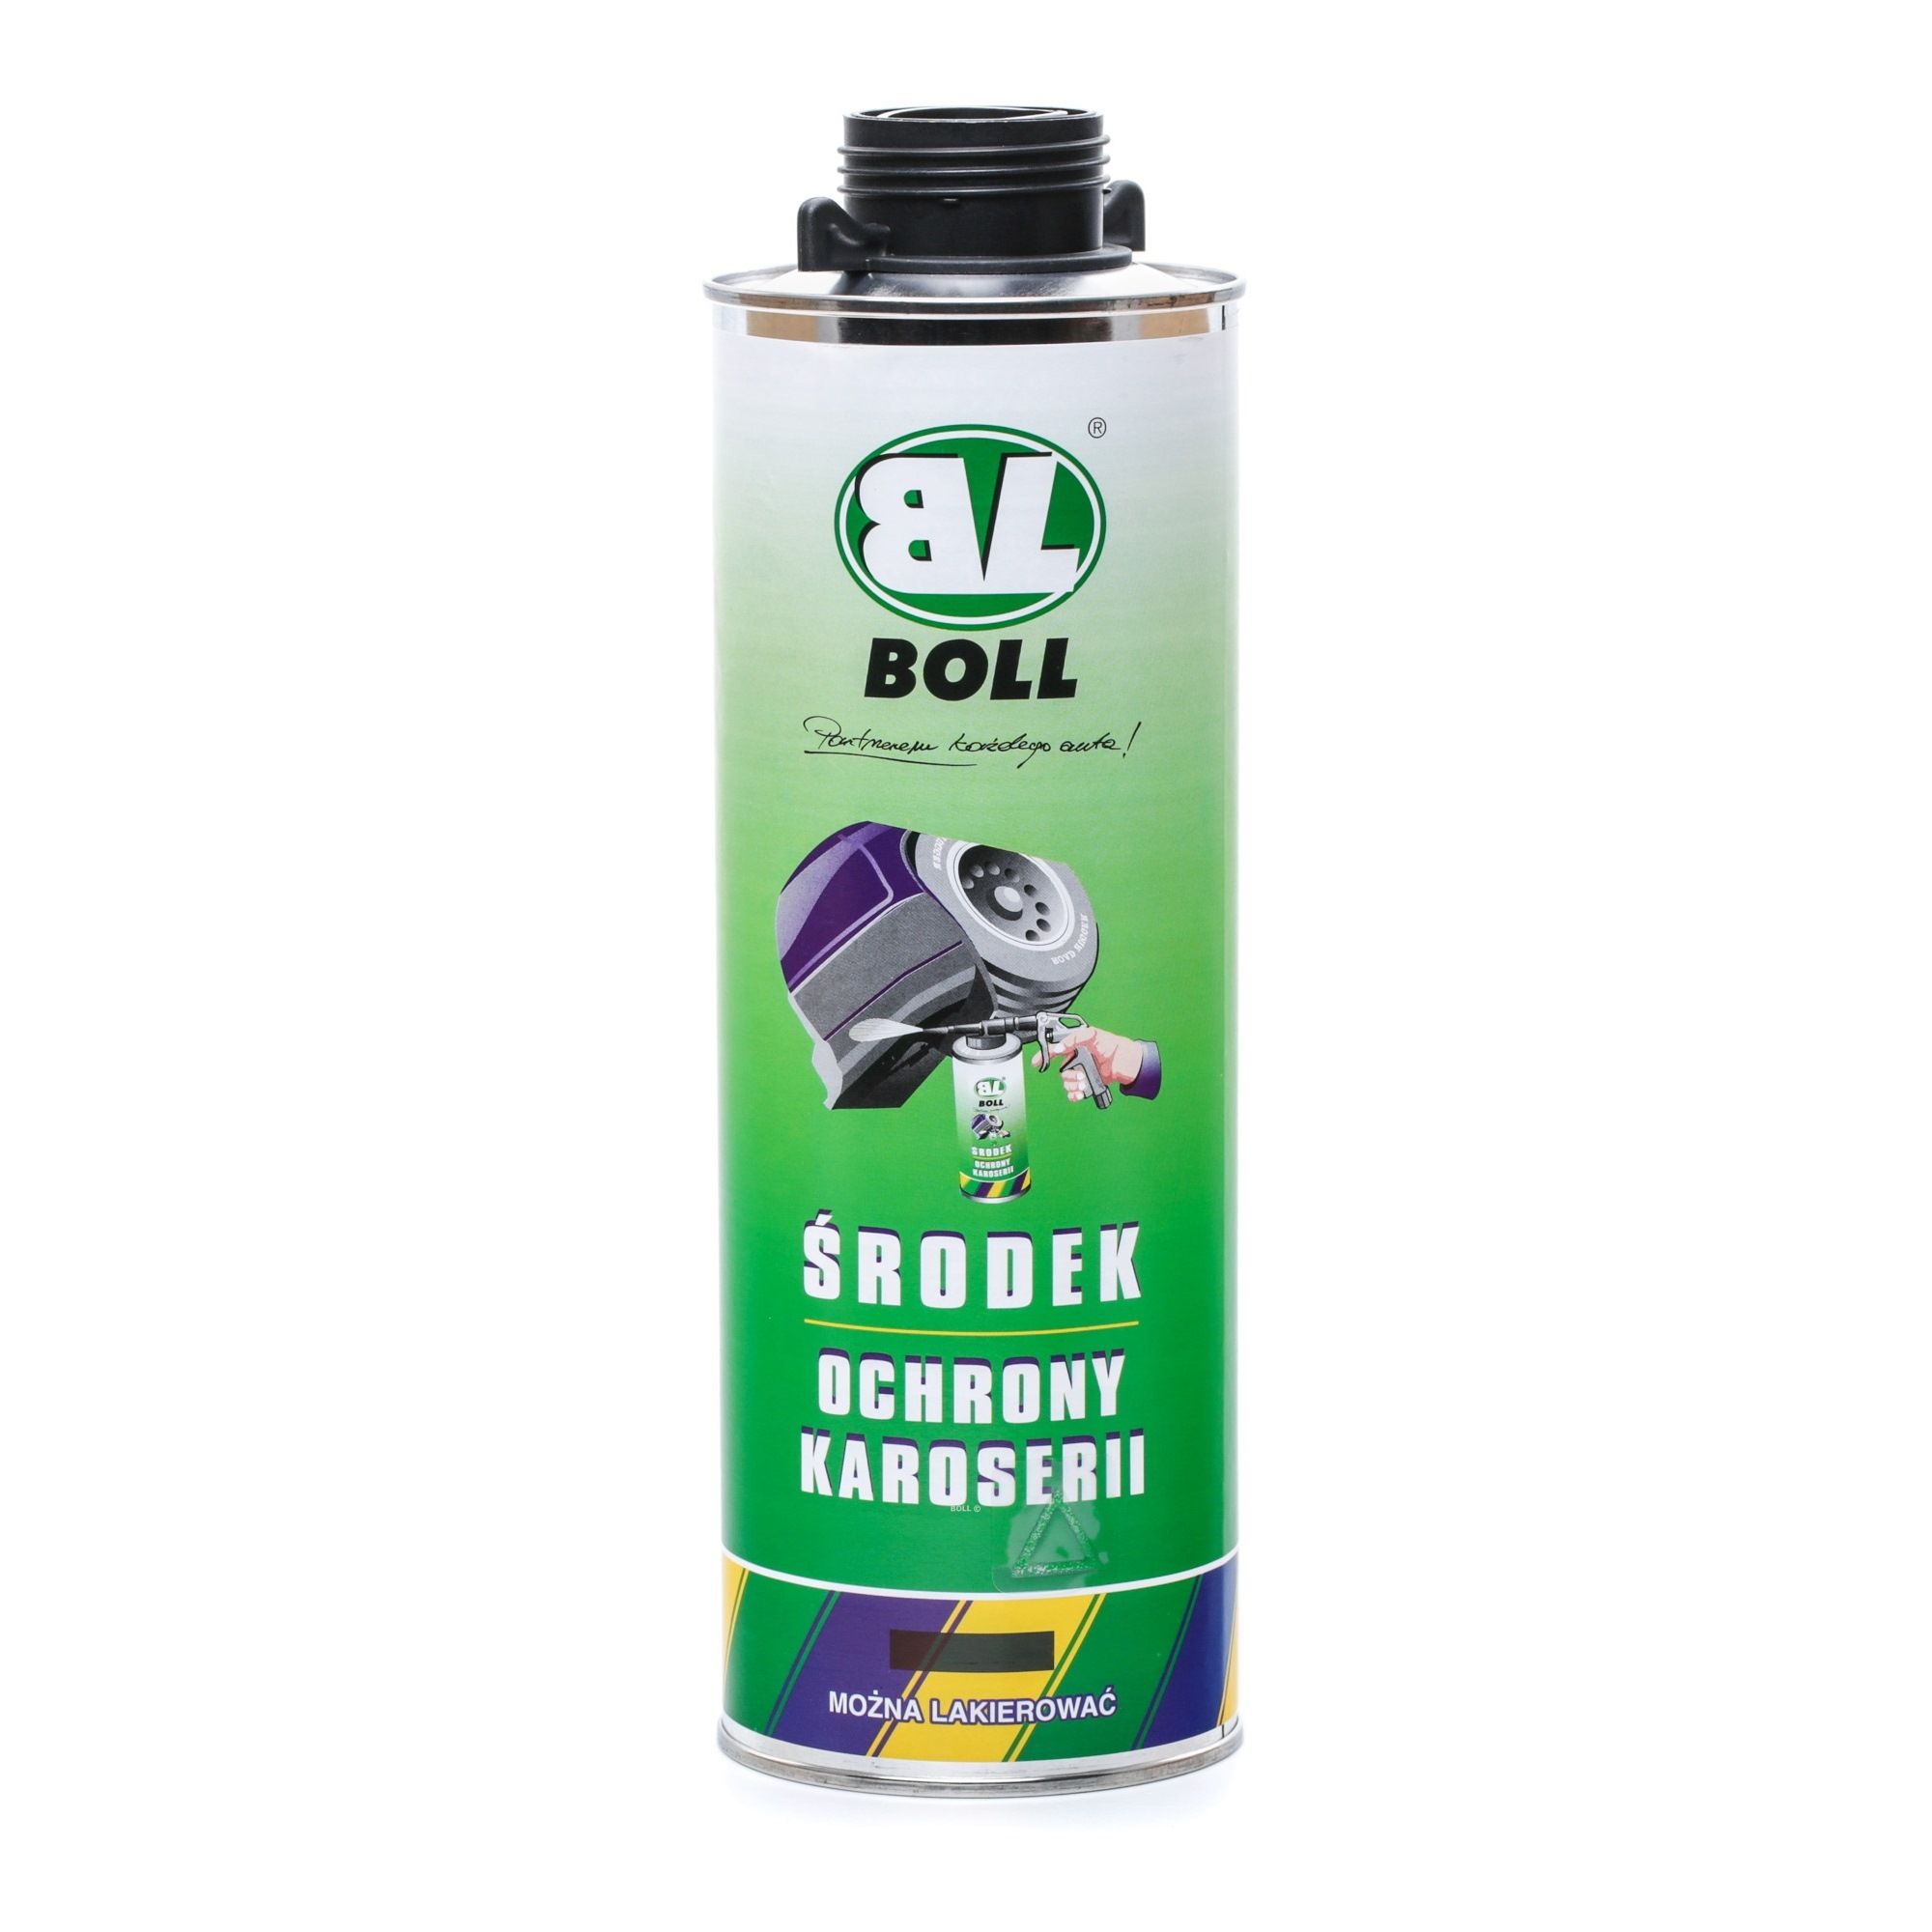 BOLL 001005 Anti chip car paint black, Over-paintable, Capacity: 1l